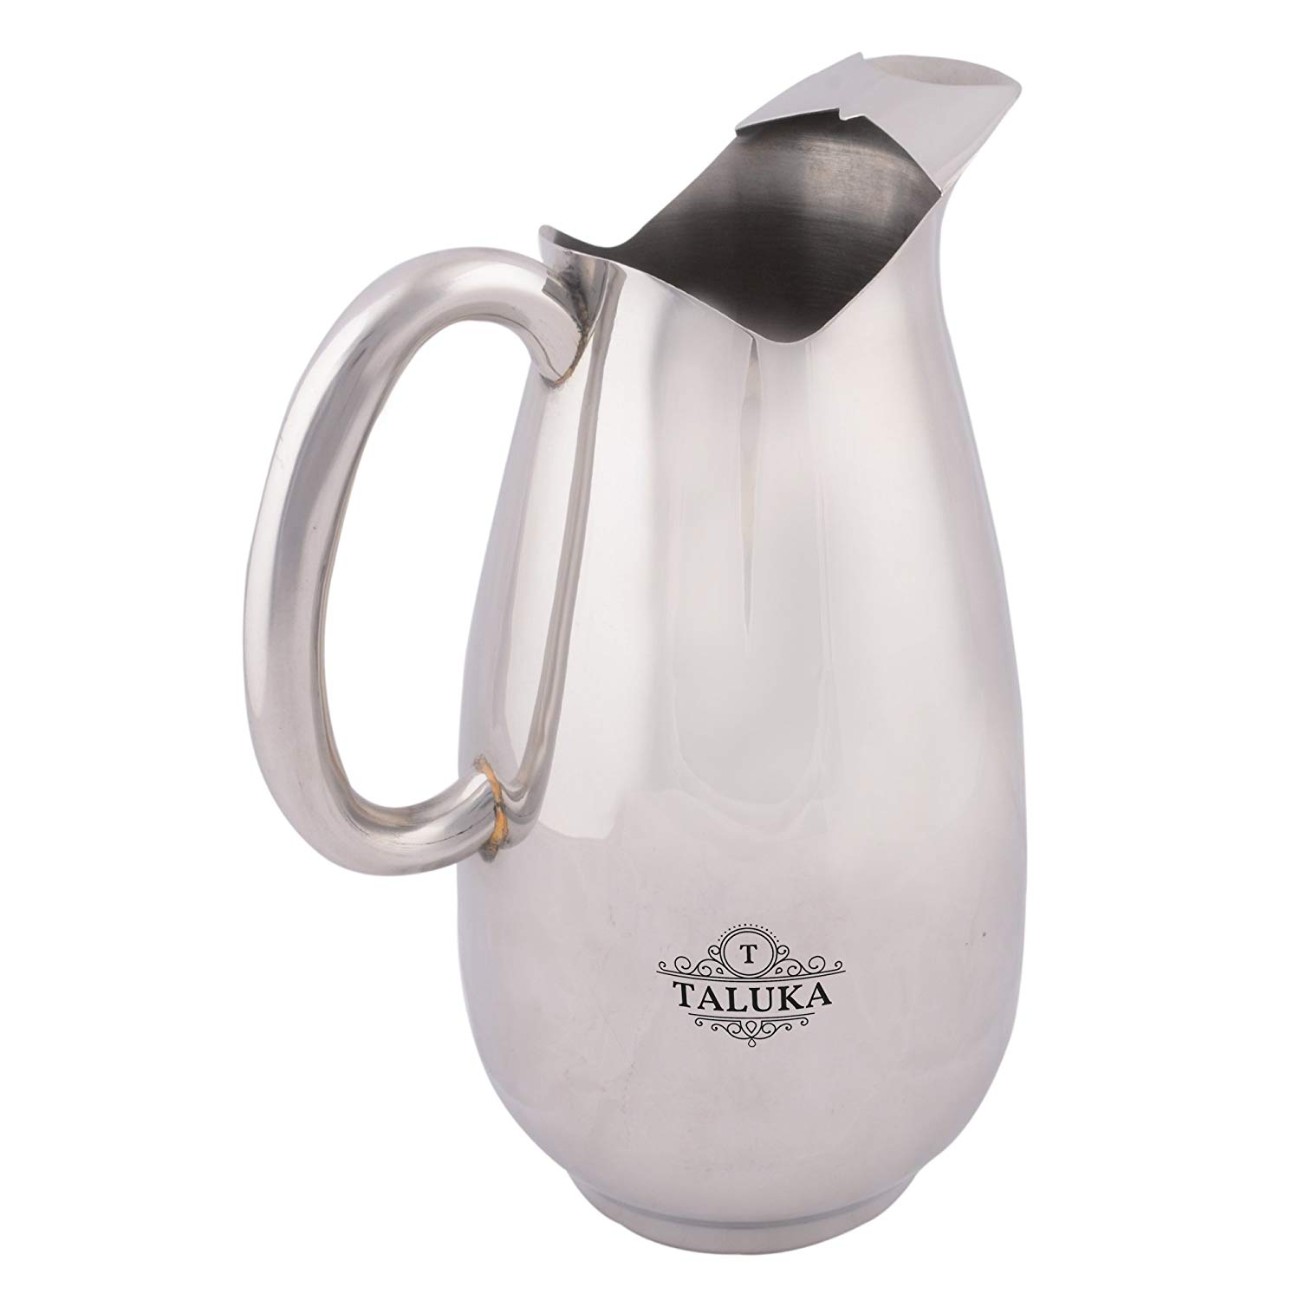 Stainless Steel Jug Pitcher For Drinking Storage 1800 ML Hotel Bar Restaurant Home Use